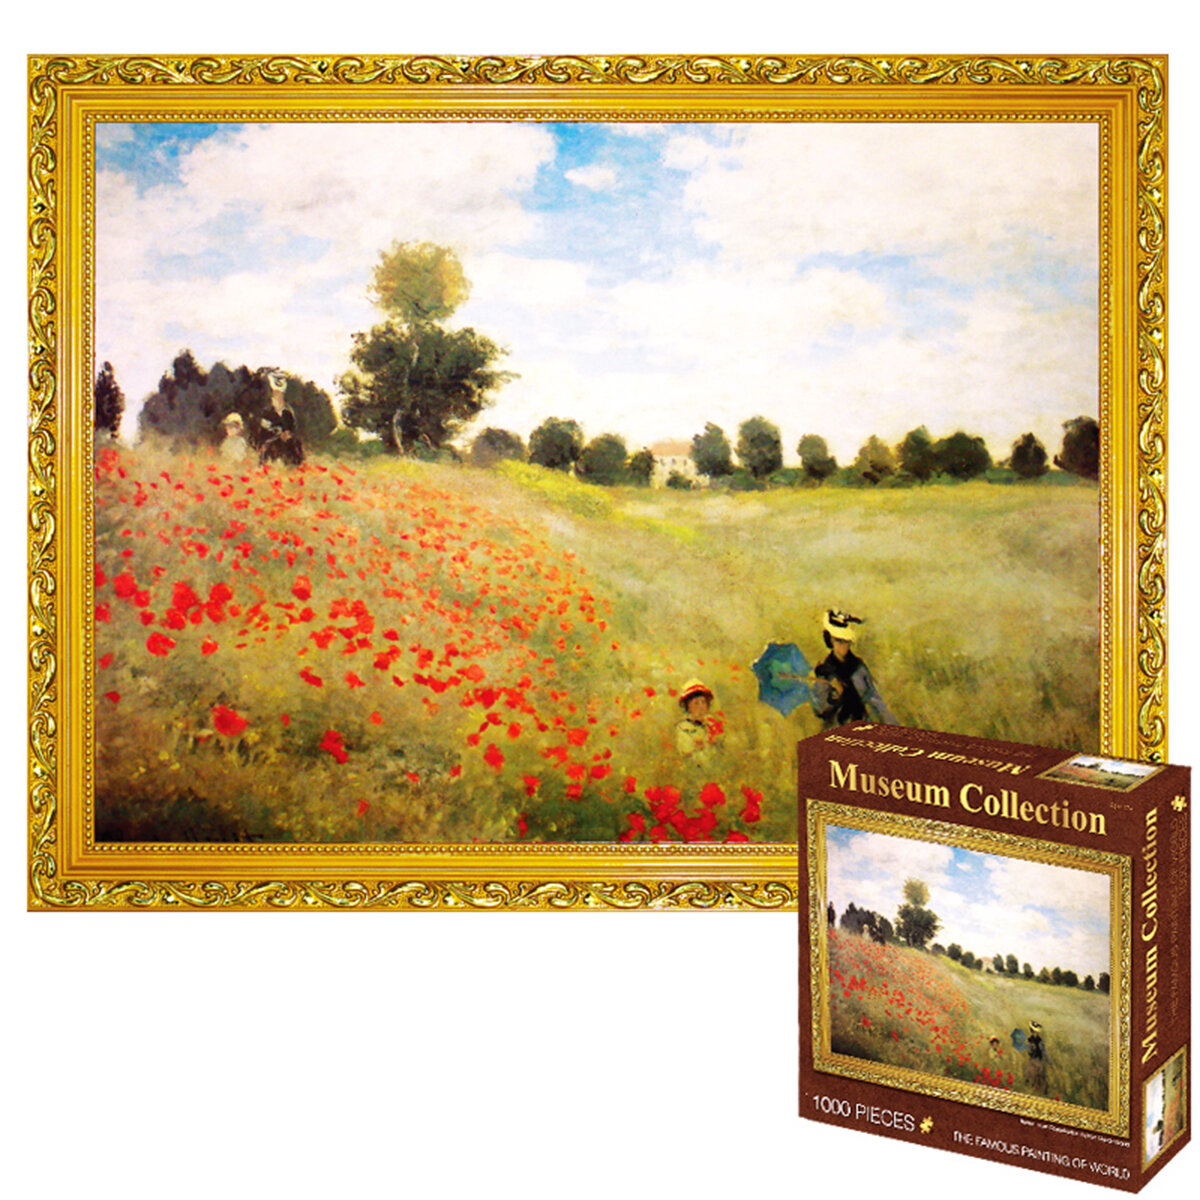 High Difficulty 1000Pcs Jigsaw Puzzles Oil Painting Puzzle Children's Educational Jigsaw Puzzle Toy 